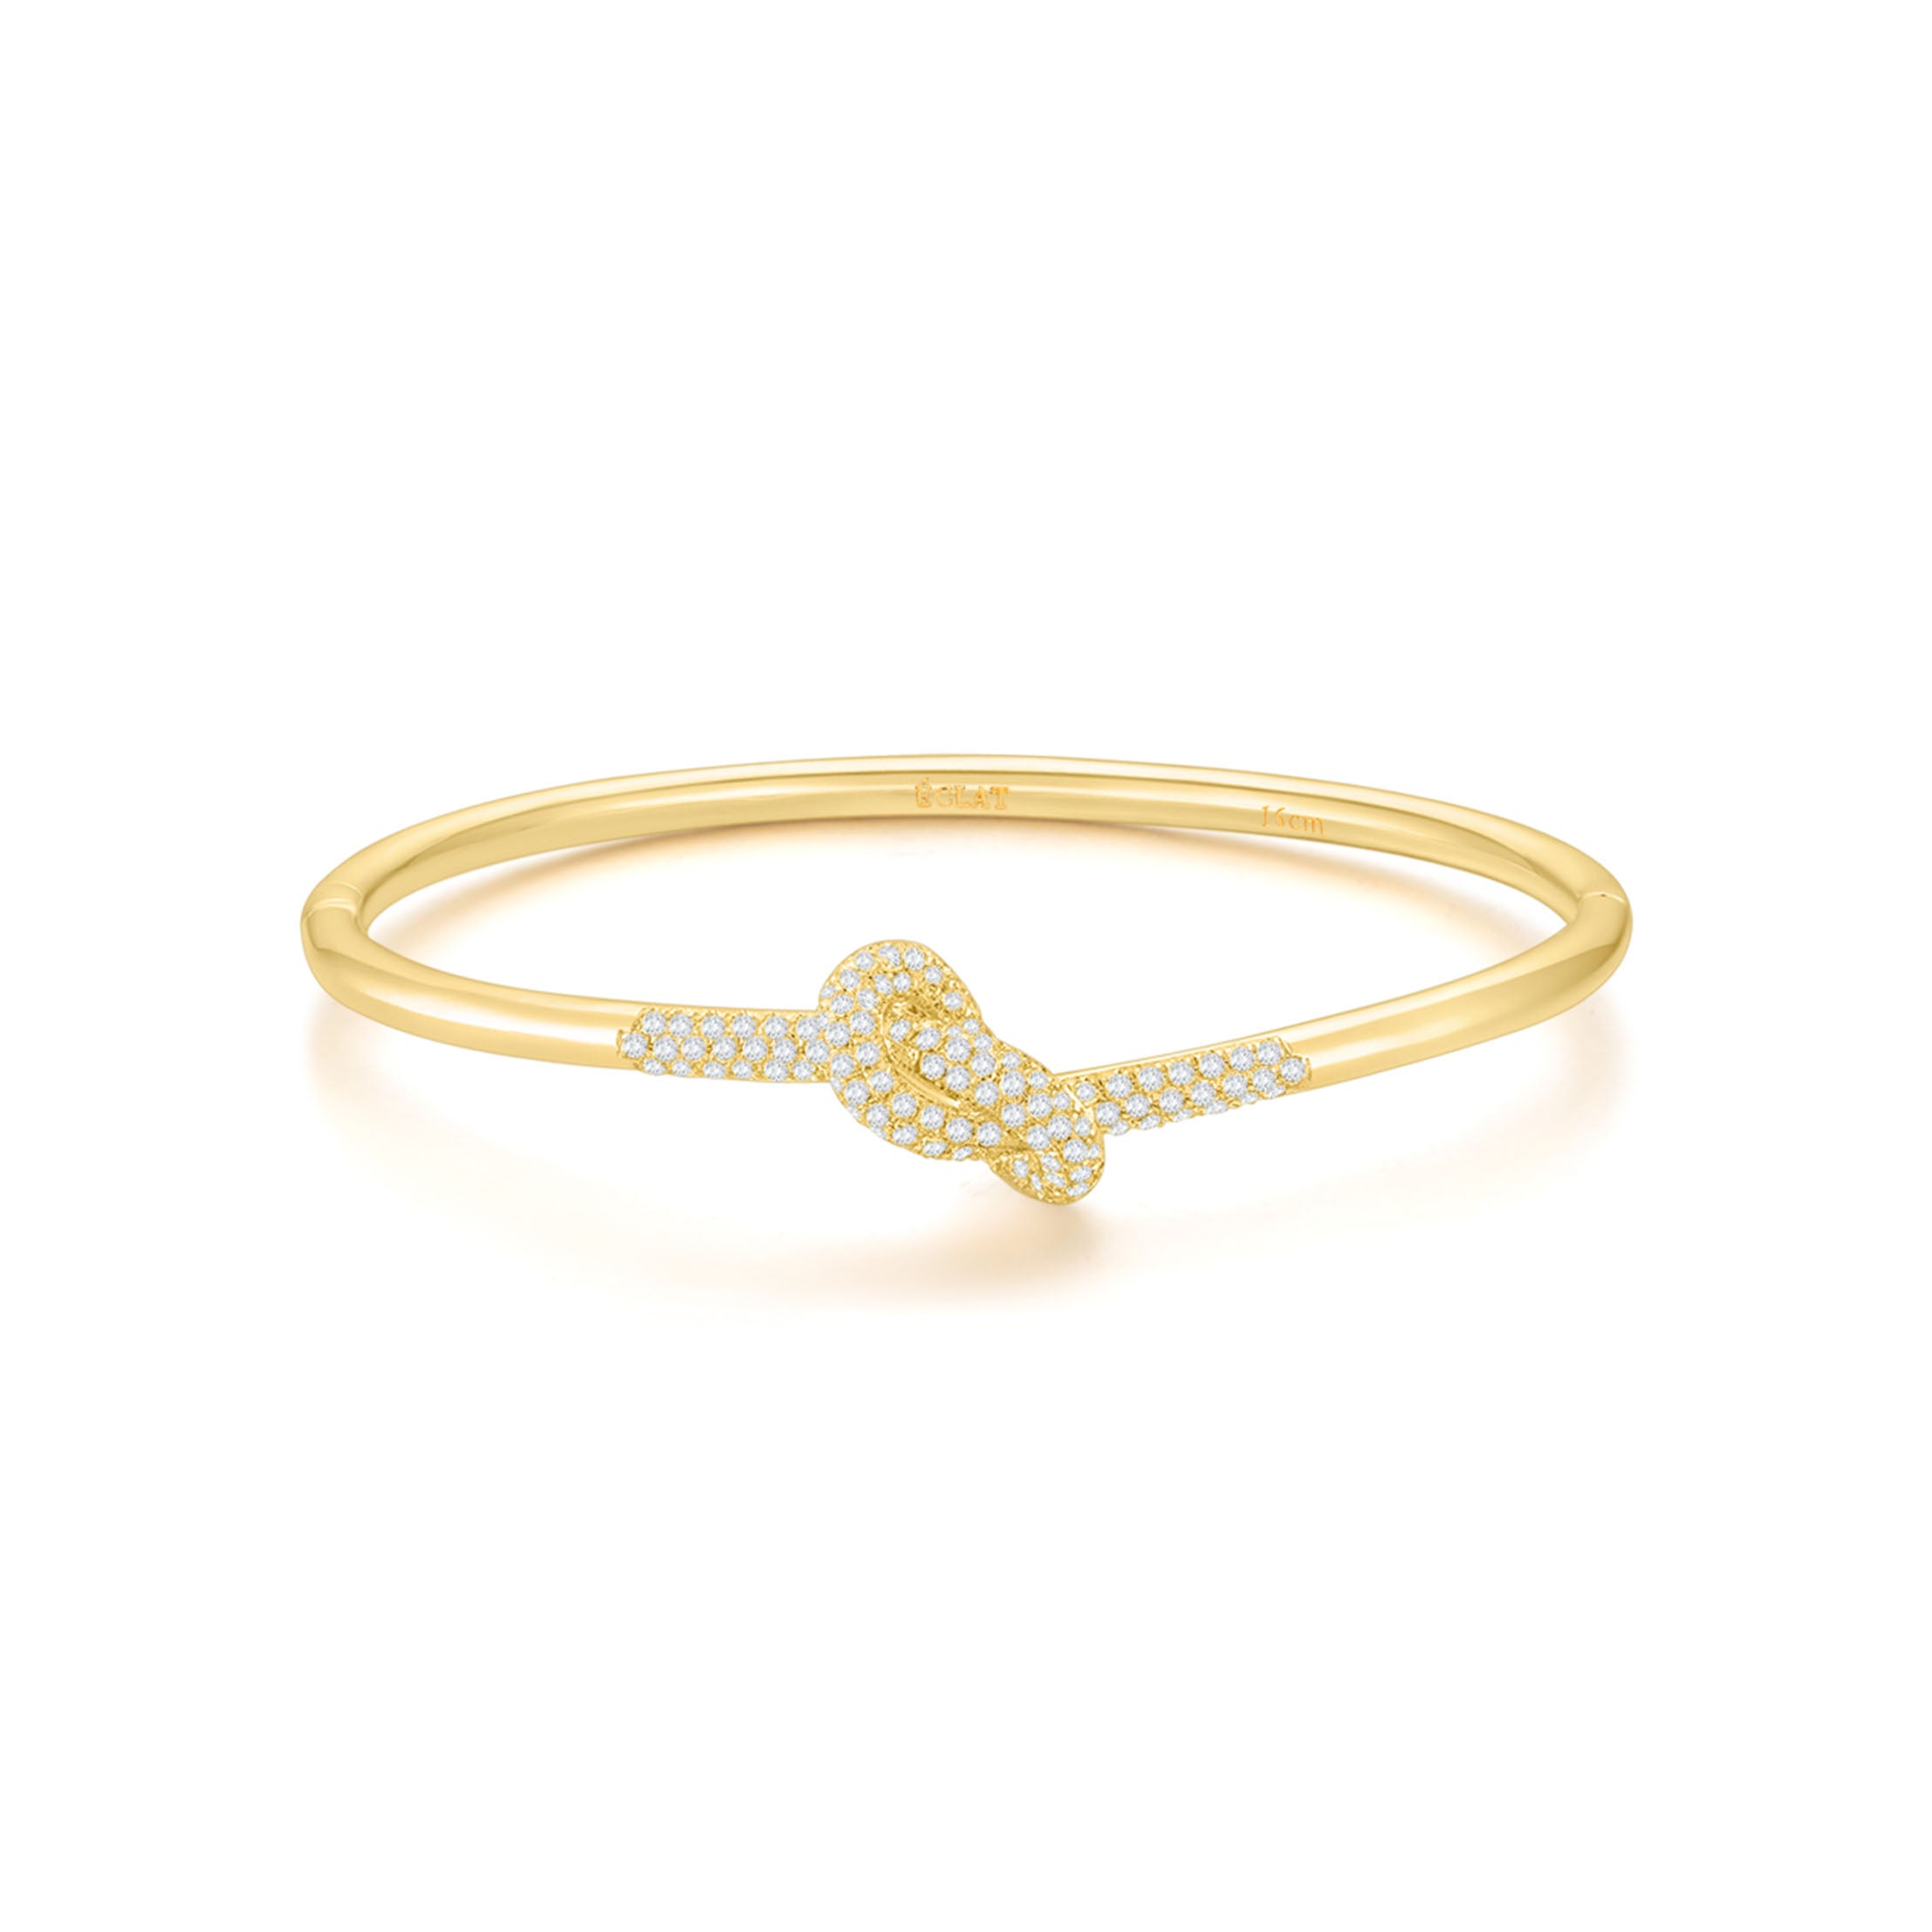 KNOT Alone® Bangle (Yellow Gold) with Pave Stones - Eclat by Oui